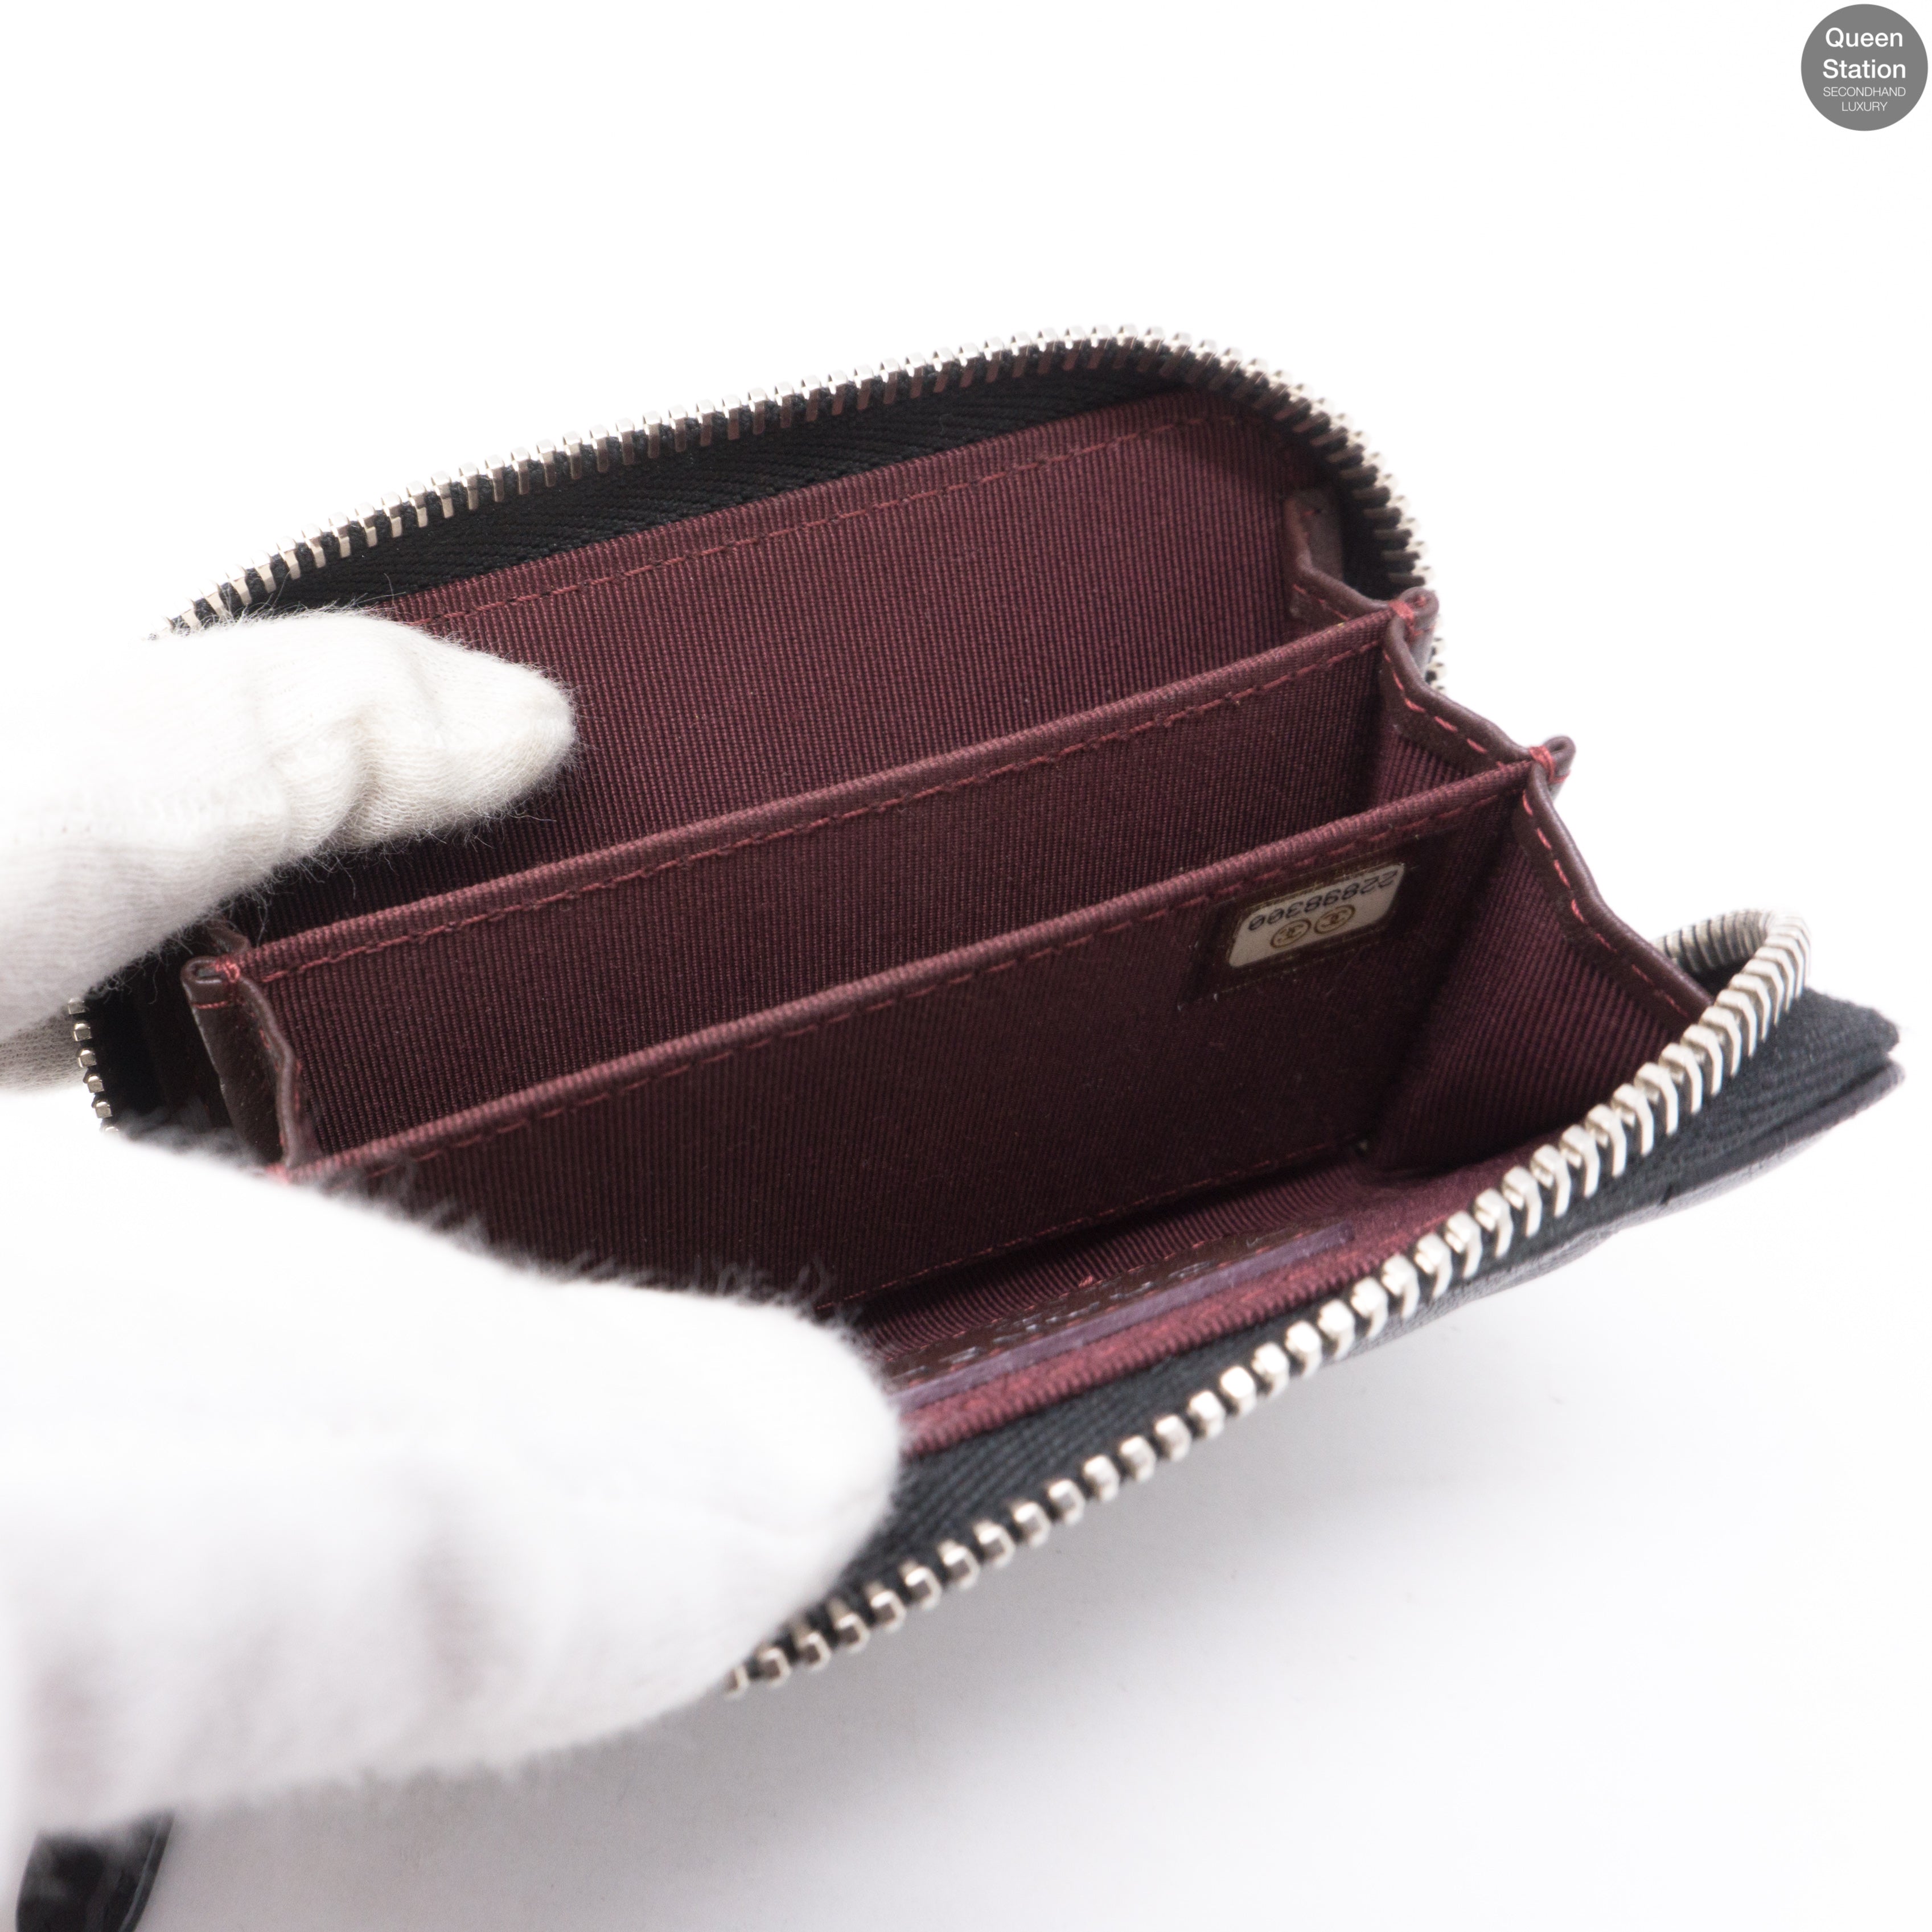 Luxury Leather Coin Purse | Made In England by Tusting